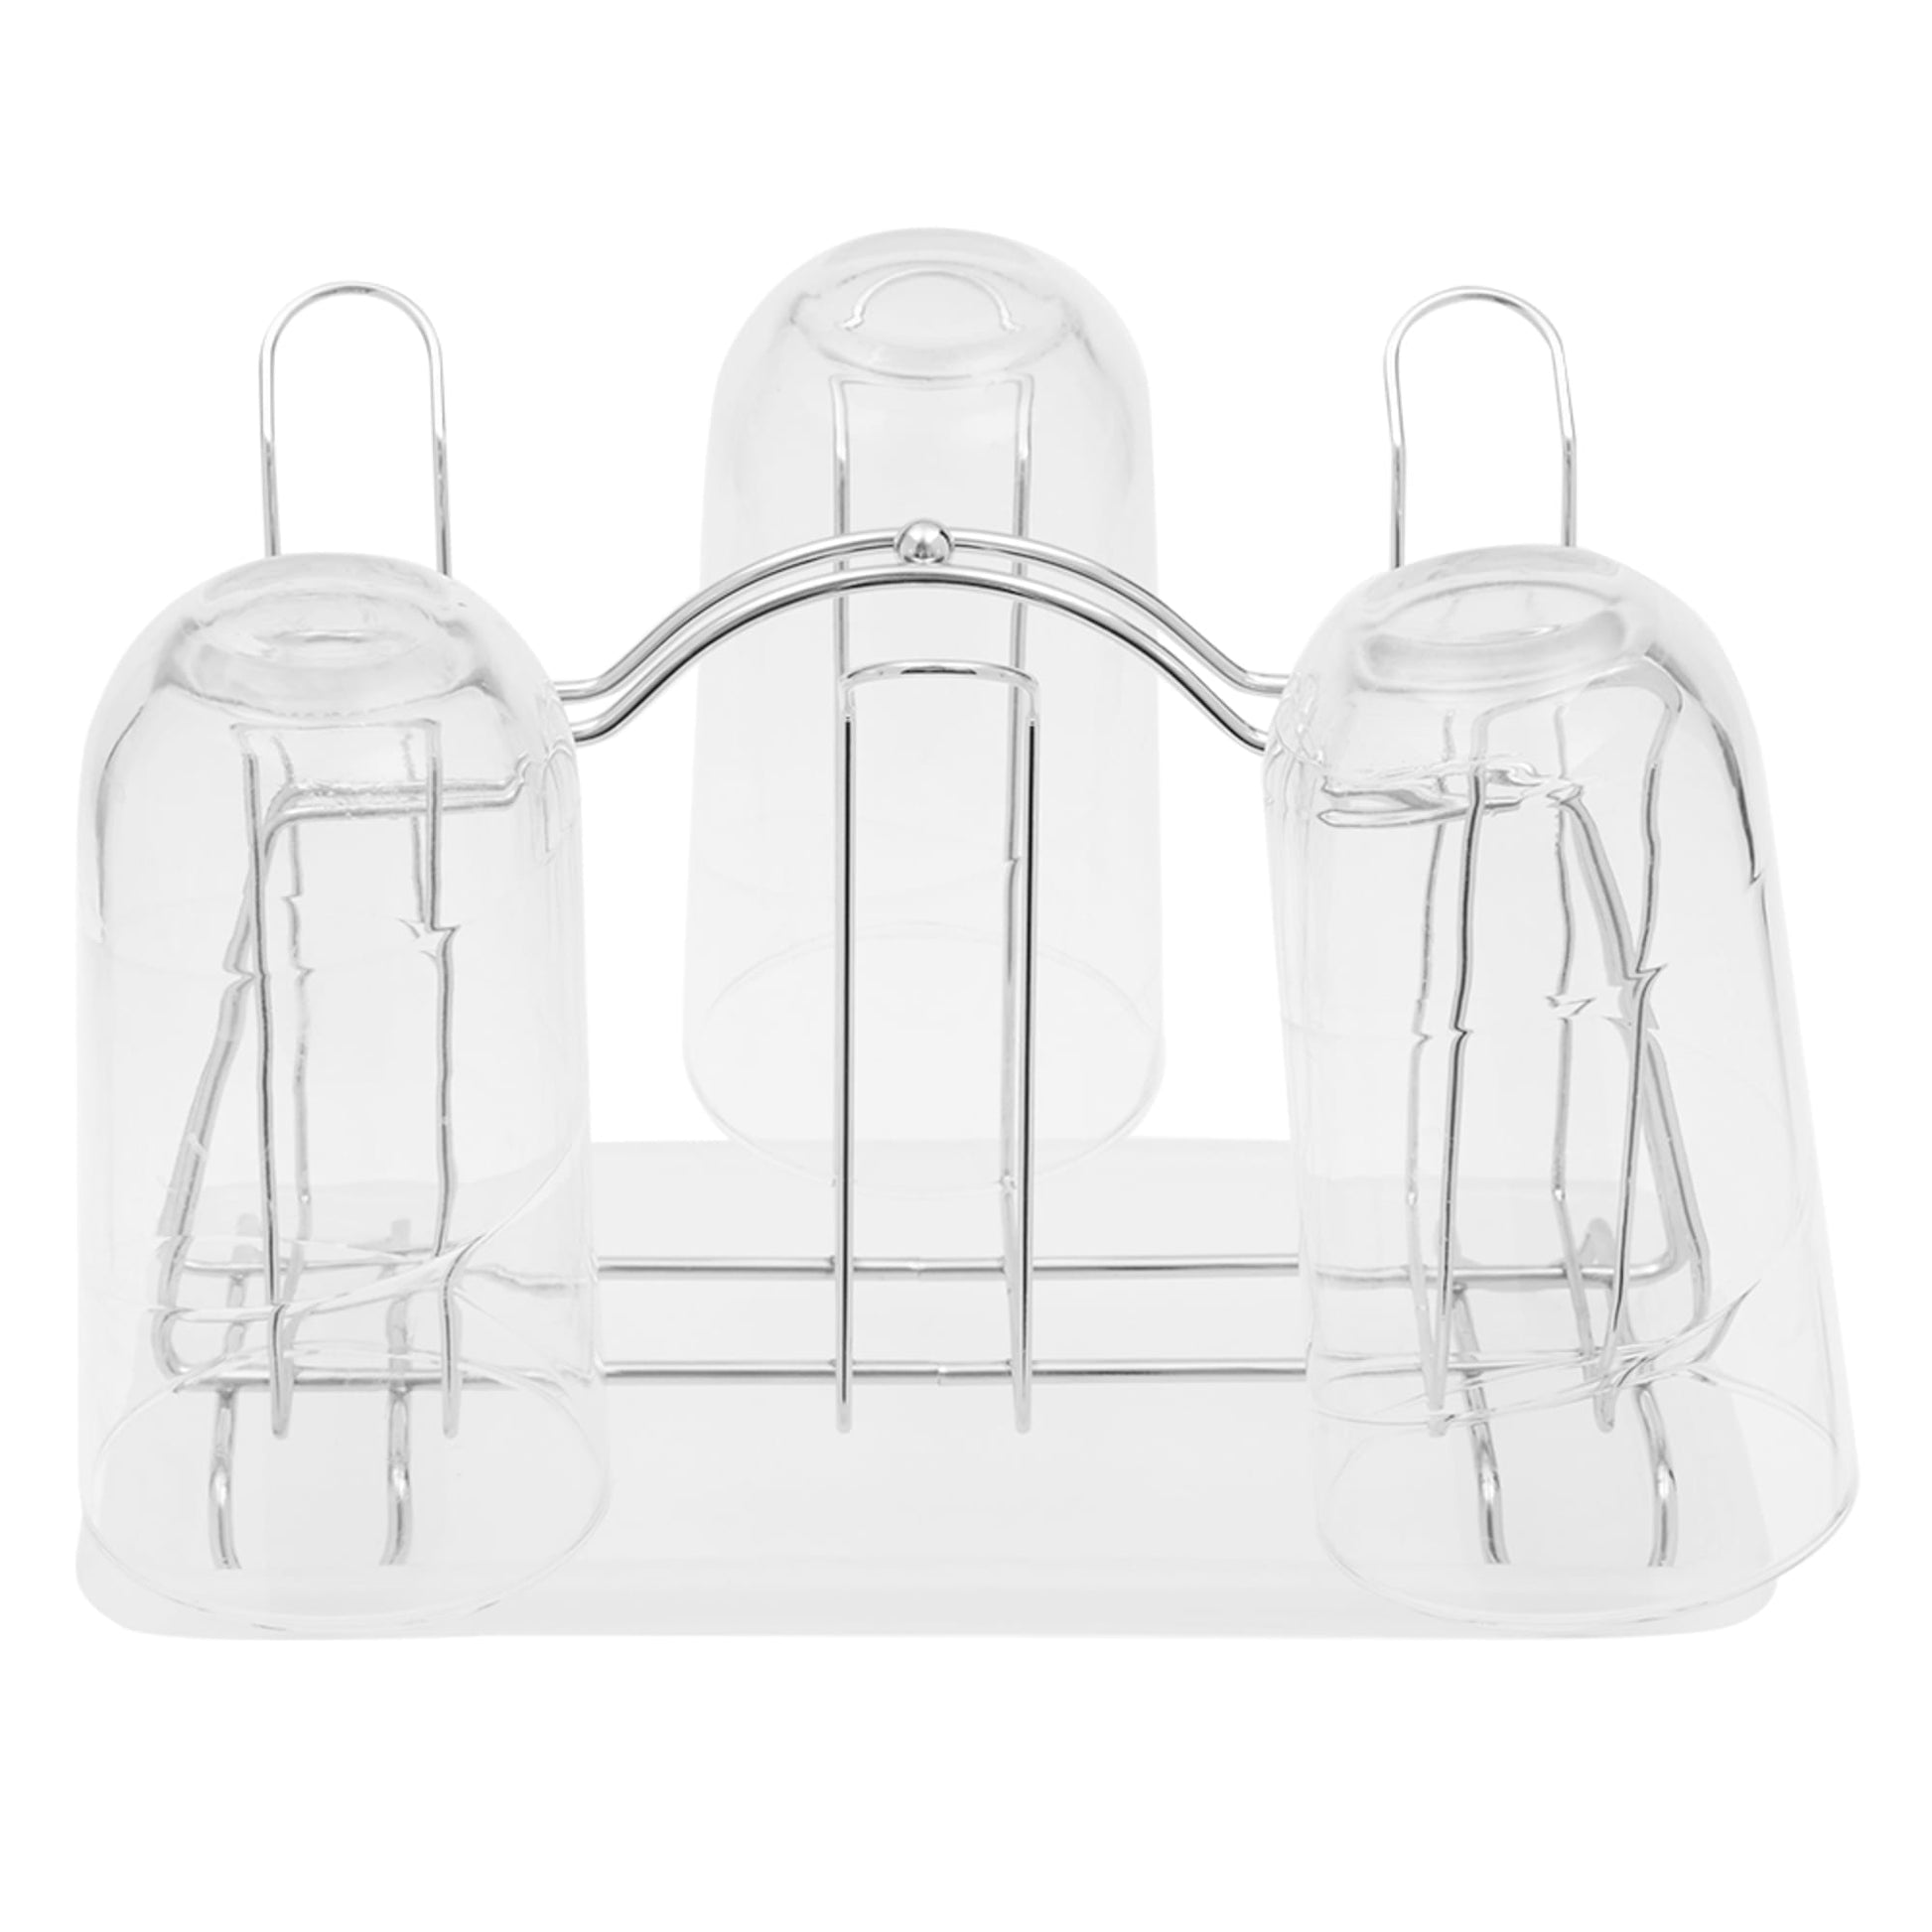 Cup Drying Rack Stand Glass Cup Drainer Holder 4type Detachable Tea Cup  Dish Drying Rack Storage Tray Organizer Kitchen Supplies - AliExpress